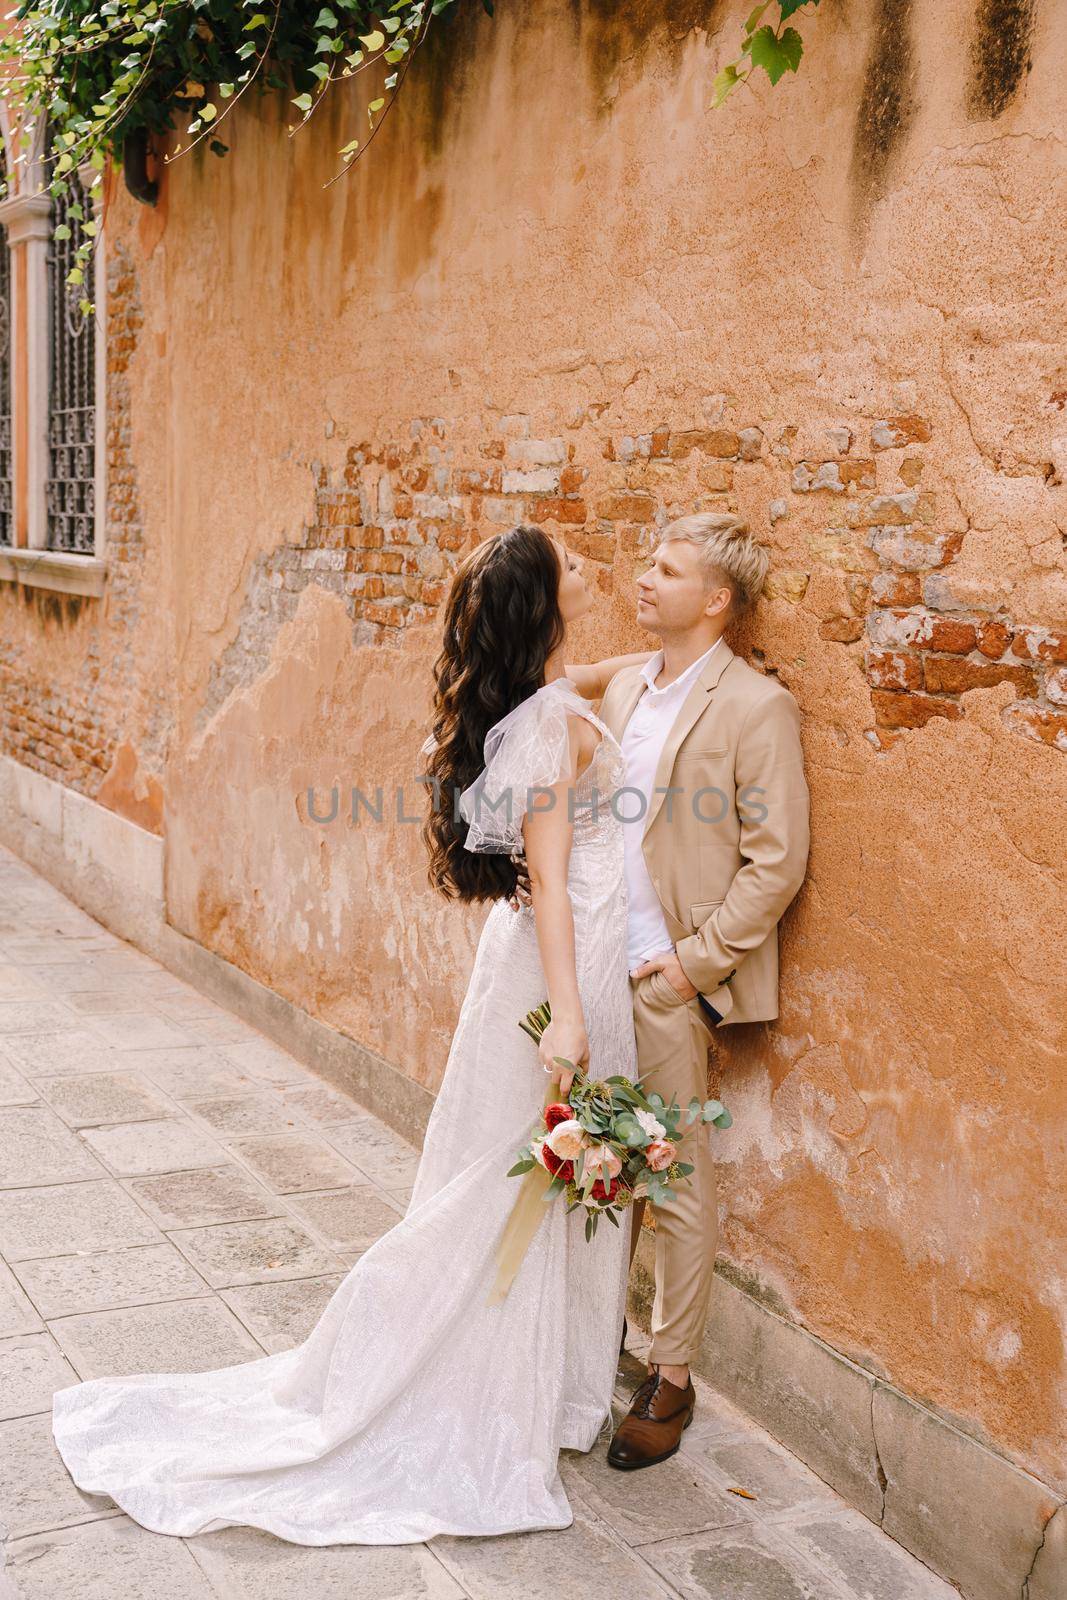 The bride and groom walk through the deserted streets of the city. Newlyweds stand next to each other and cuddle near the orange wall of a beautiful house.